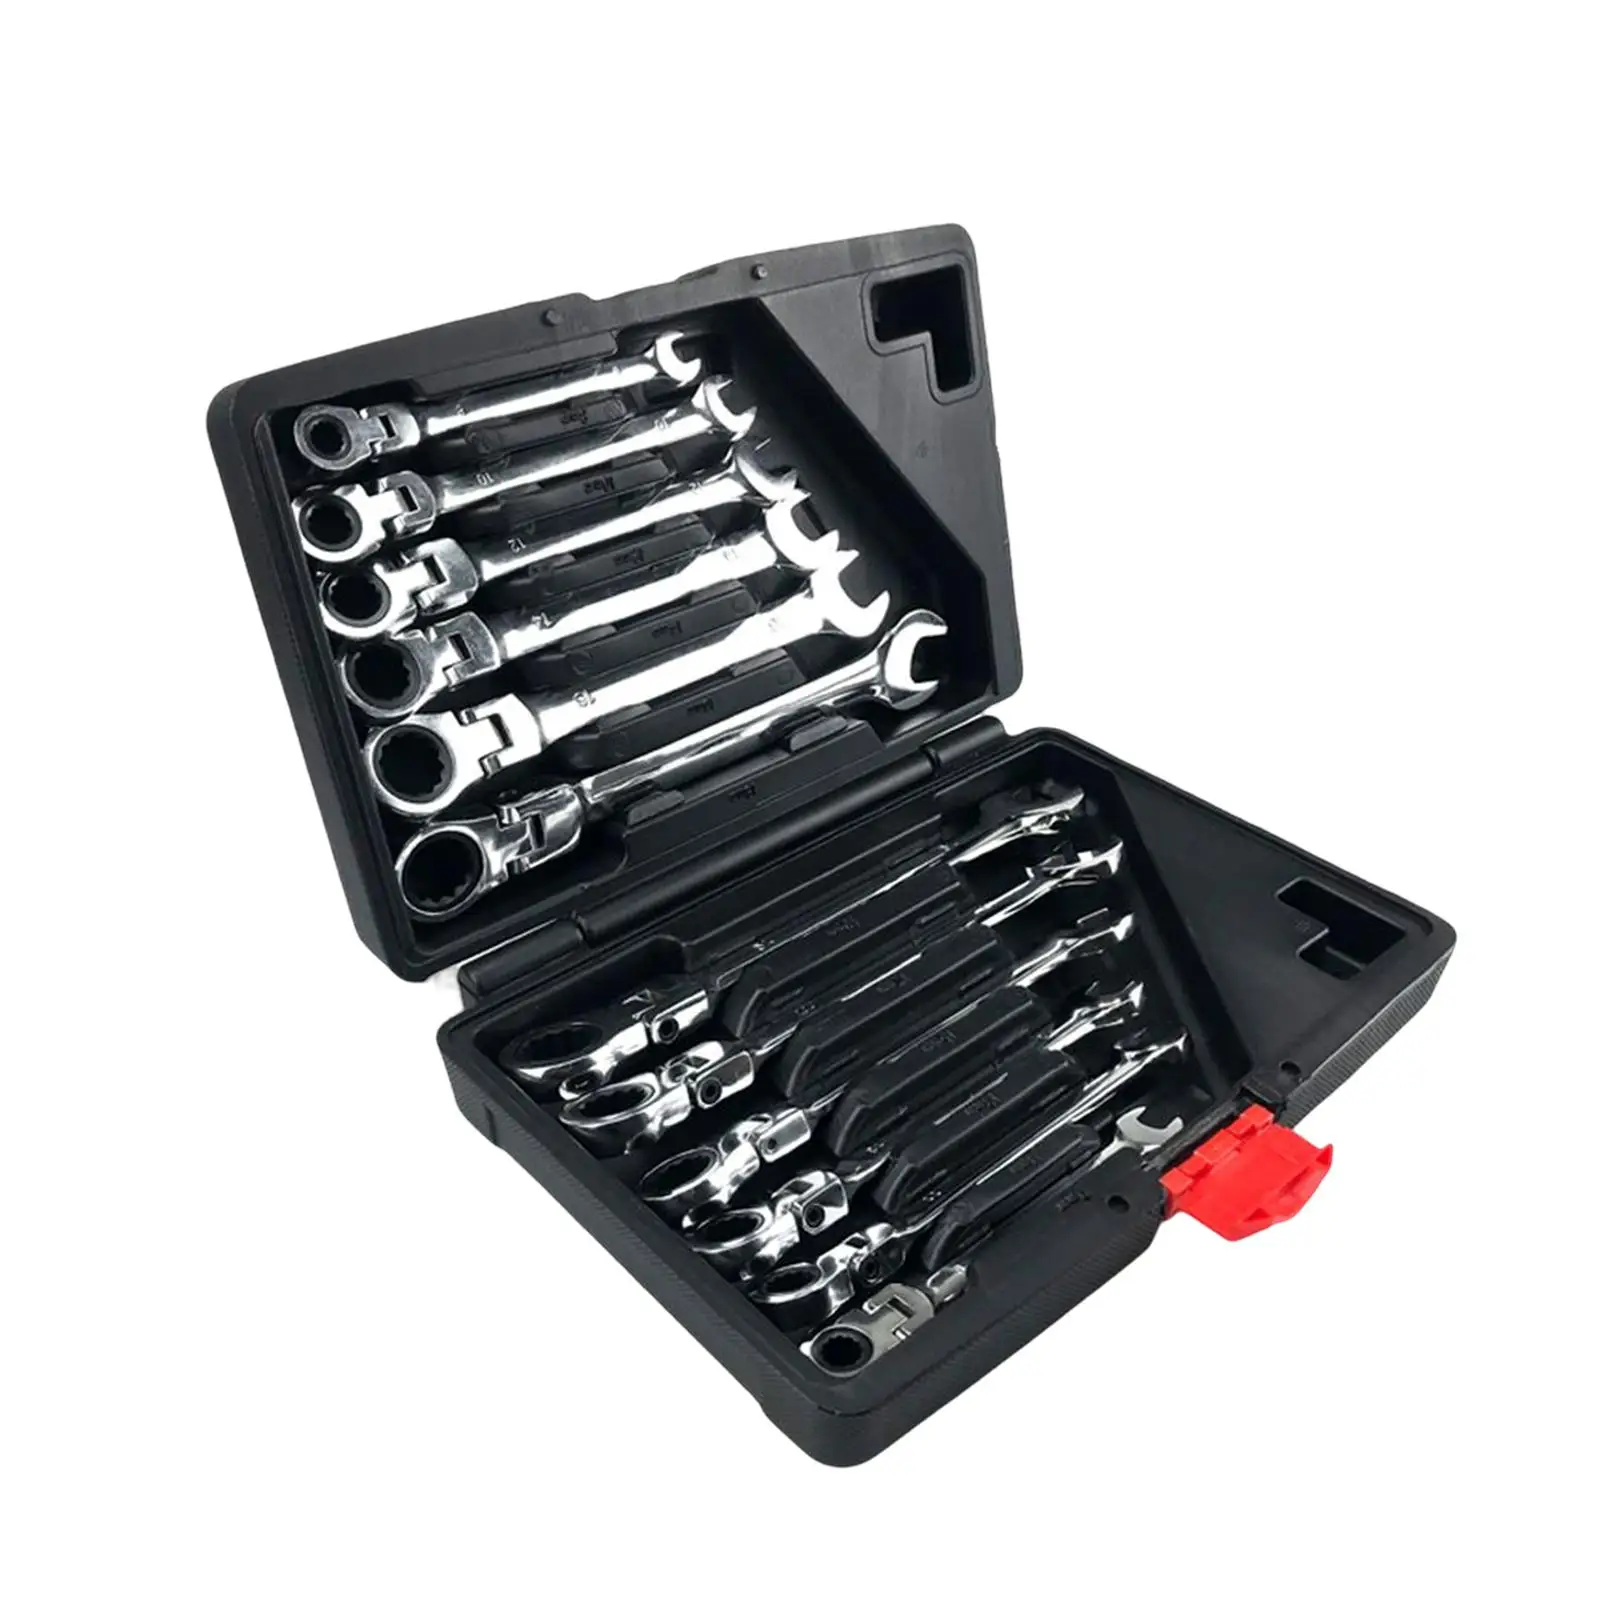 

12Pcs Ratchet Wrench Set Combination Ended Spanner Sturdy Activity Ratcheting Wrench Set for Household Equipment Repair Home